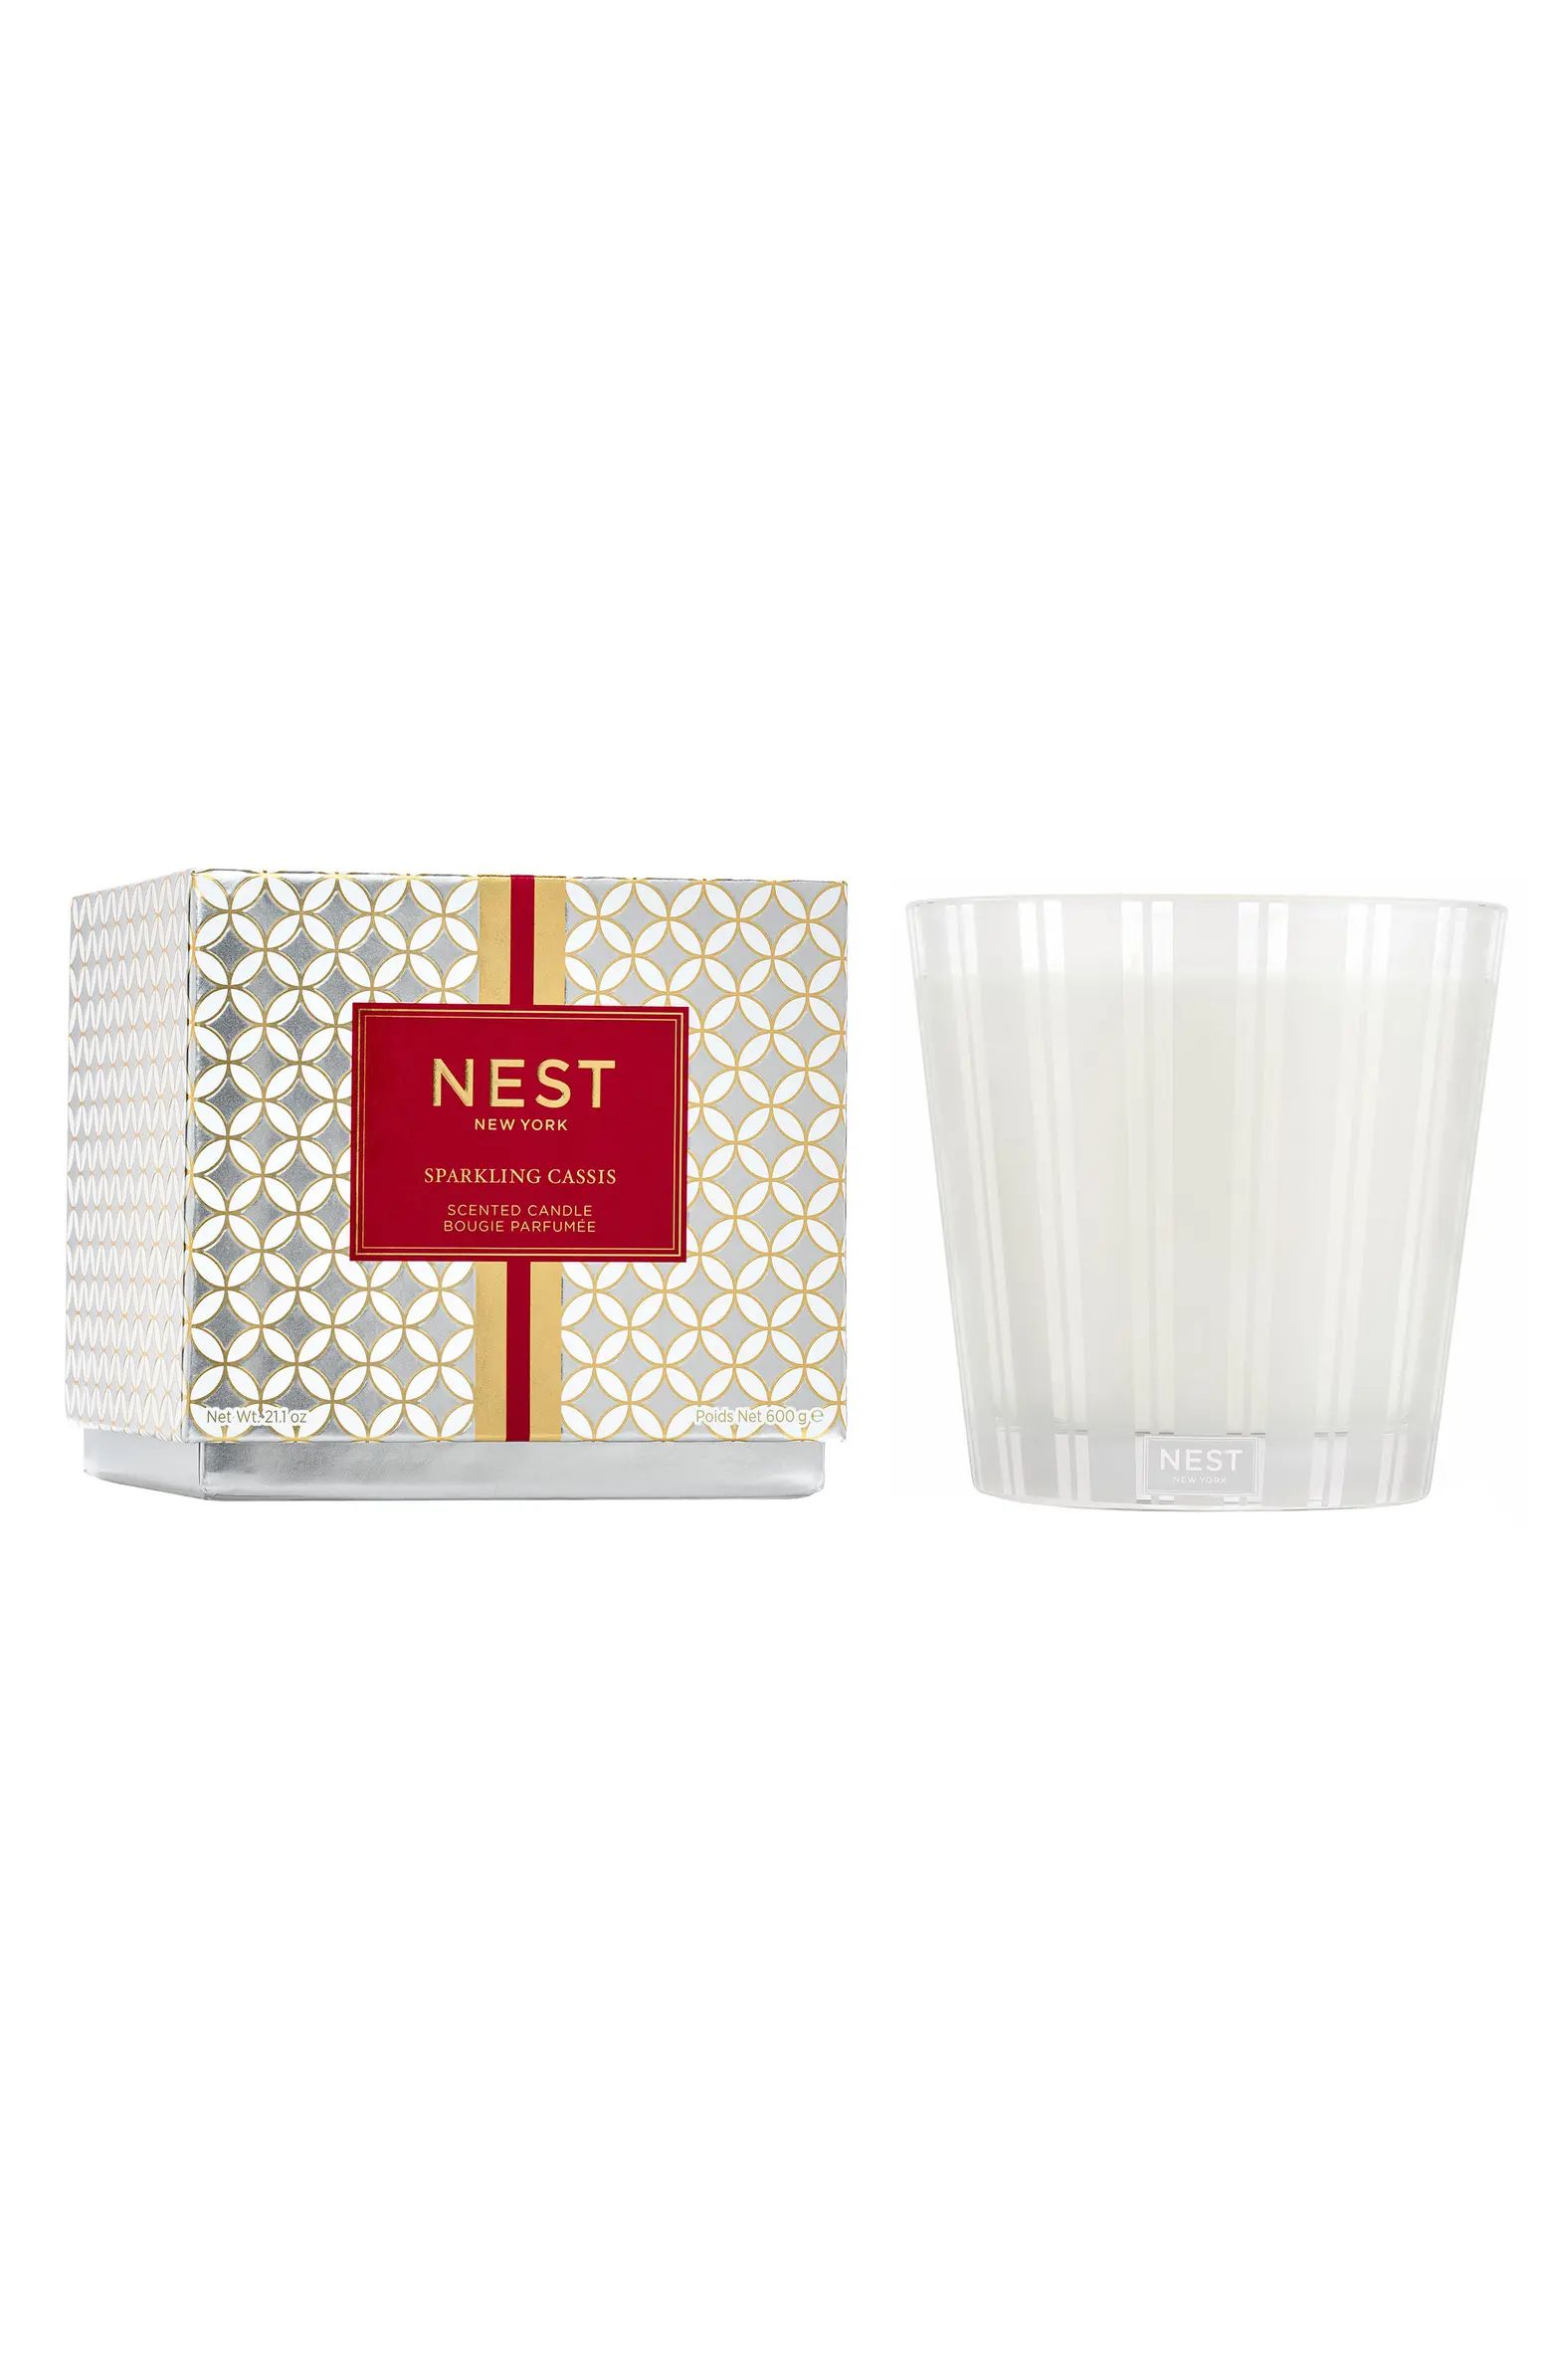 Sparkling Cassis 3-Wick Scented Candle | Nordstrom Rack